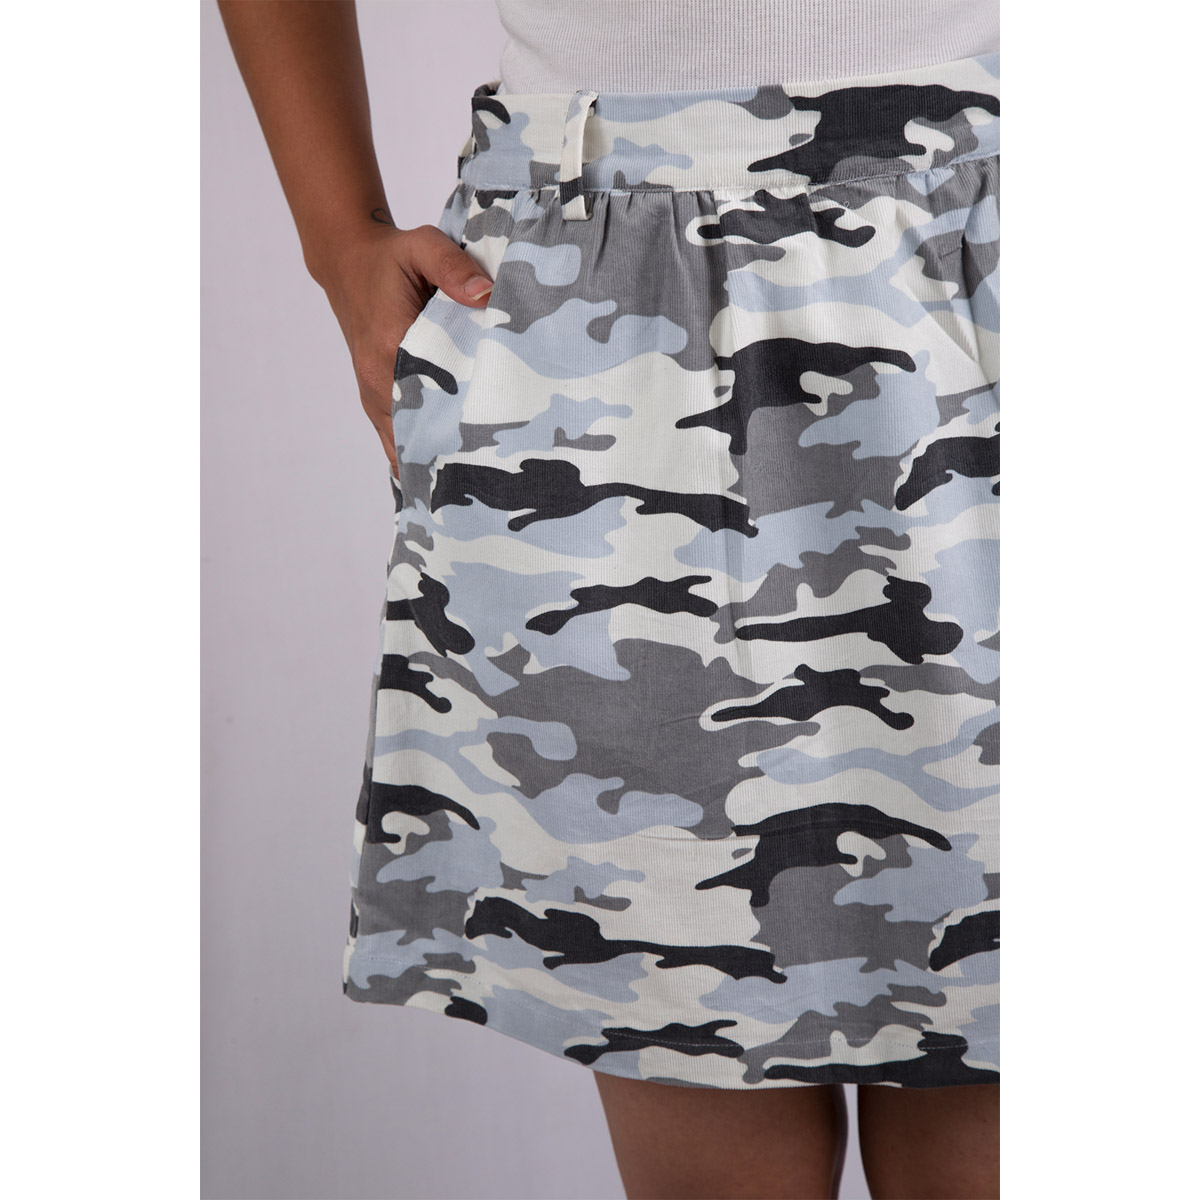 Pink Flamingo Clothing Grey and White Camo Skirt S (Size: Small)